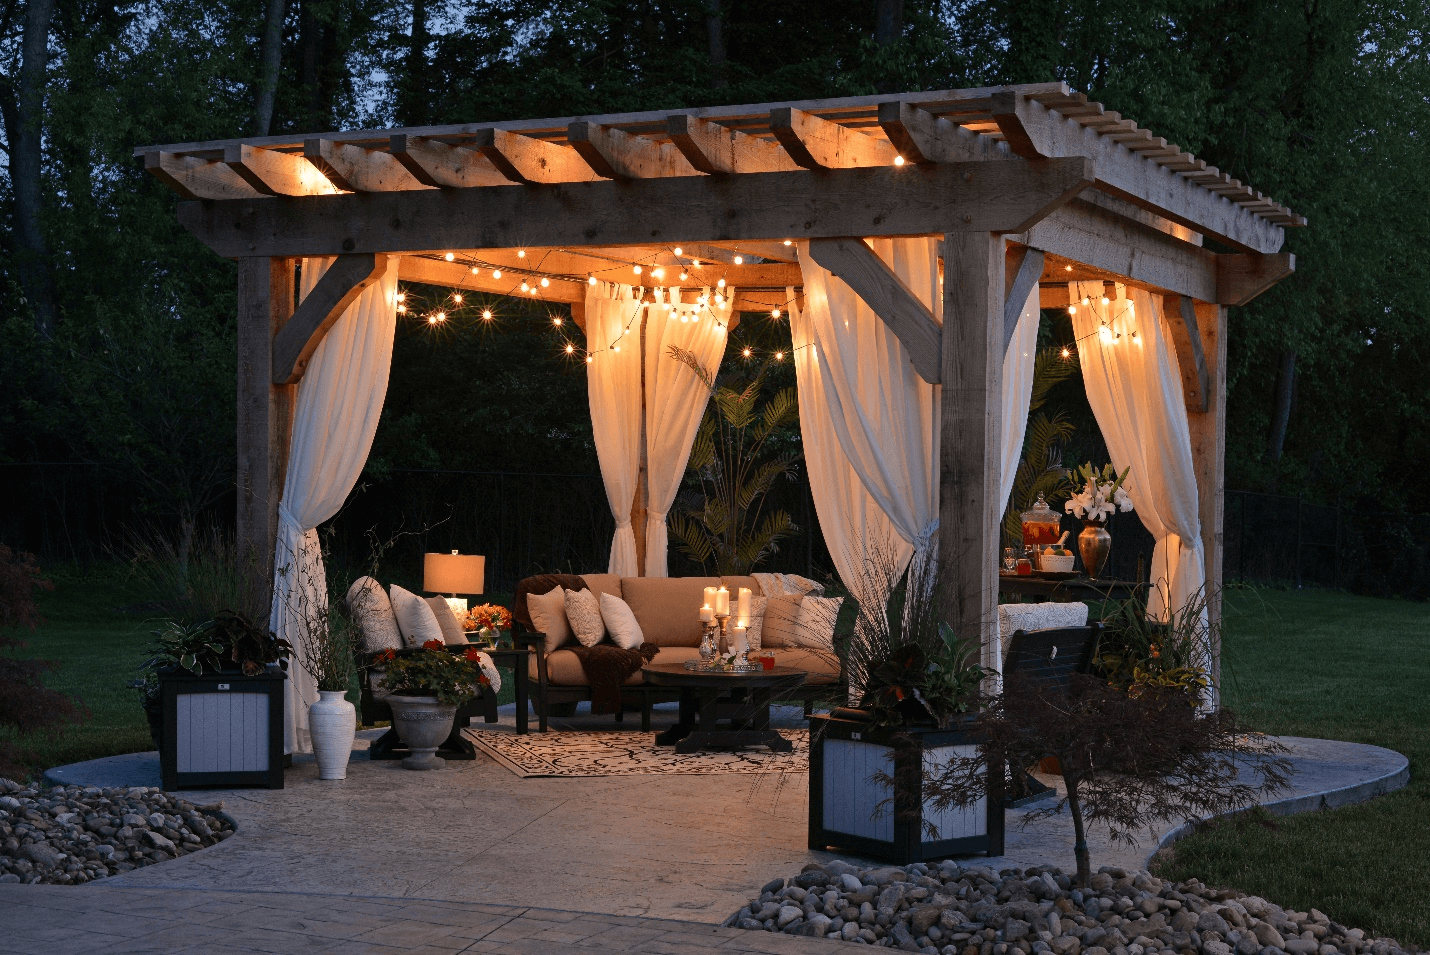 how to hang string lights on covered patio - famlighting